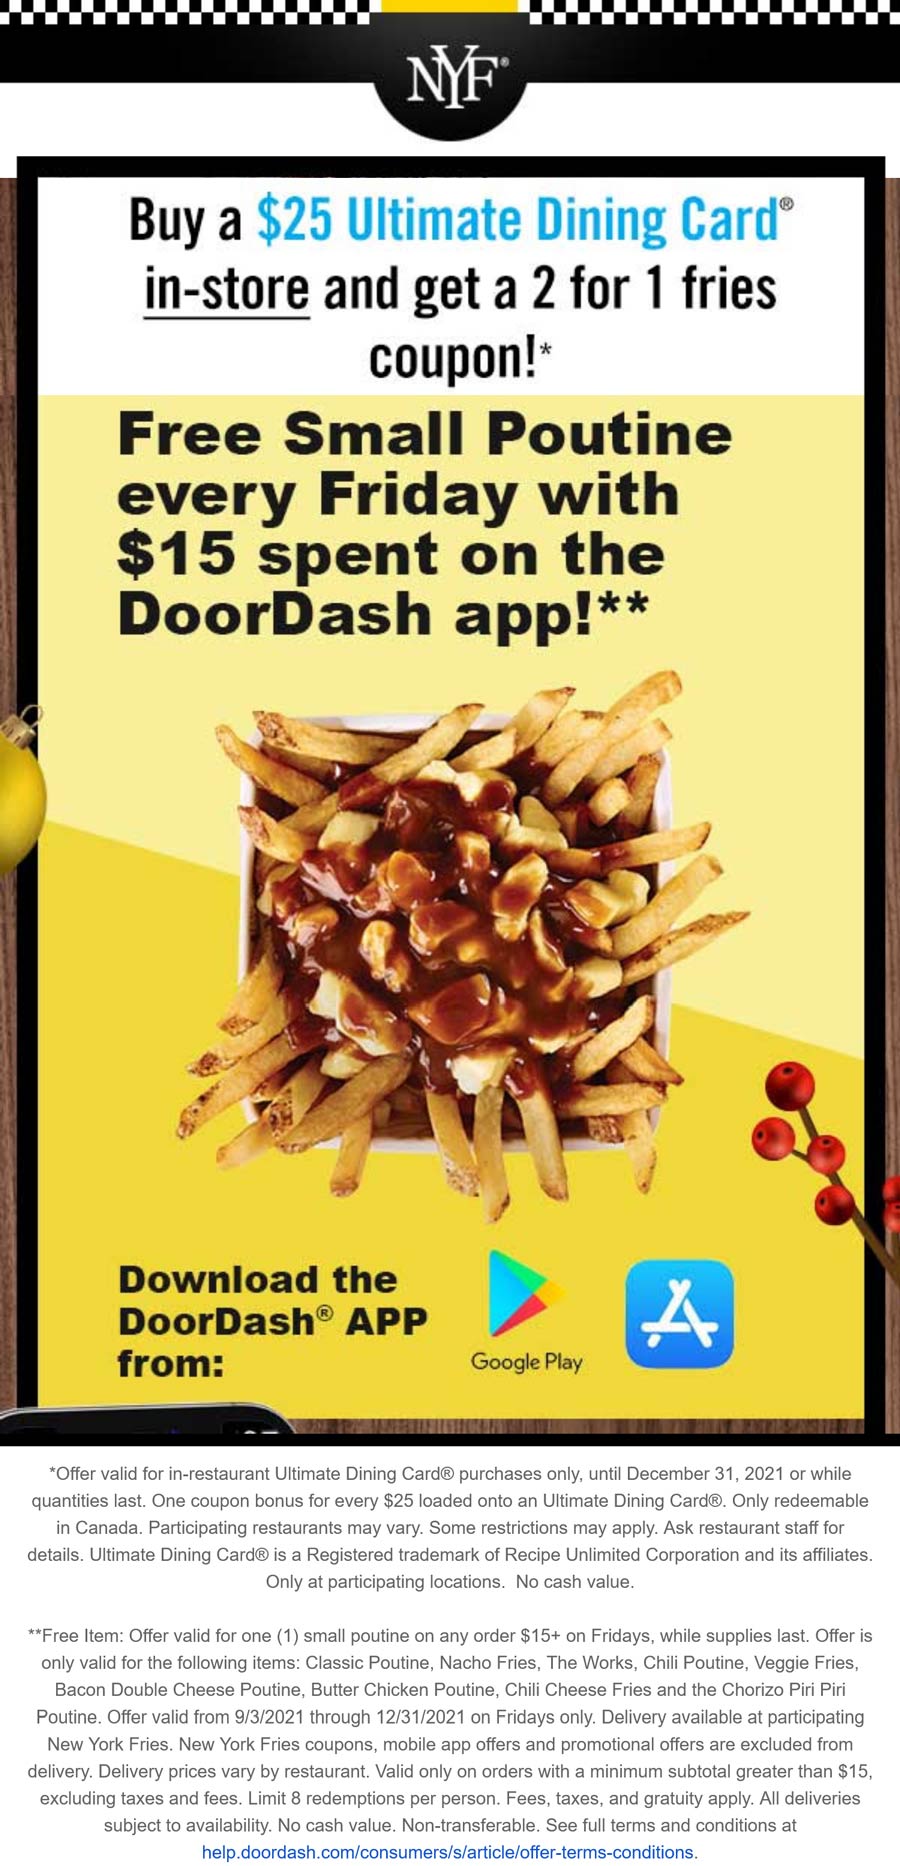 New York Fries restaurants Coupon  2-for-1 fries with your $25 card at New York Fries restaurants #newyorkfries 